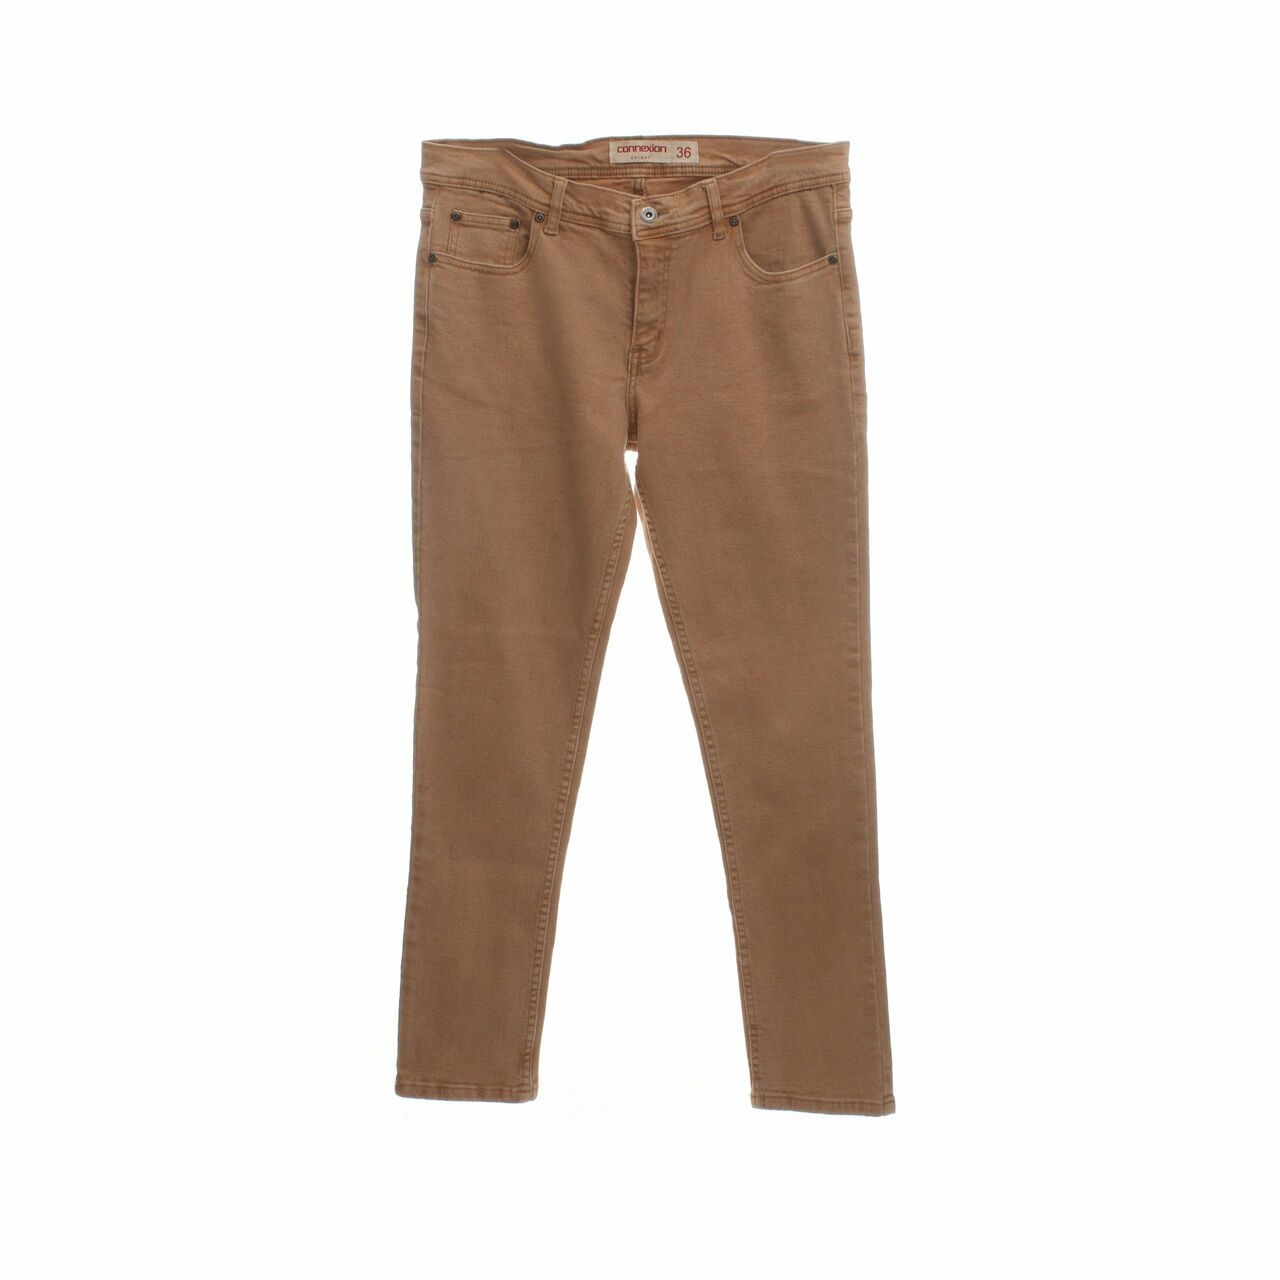 Connexion Camel Skinny Jeans